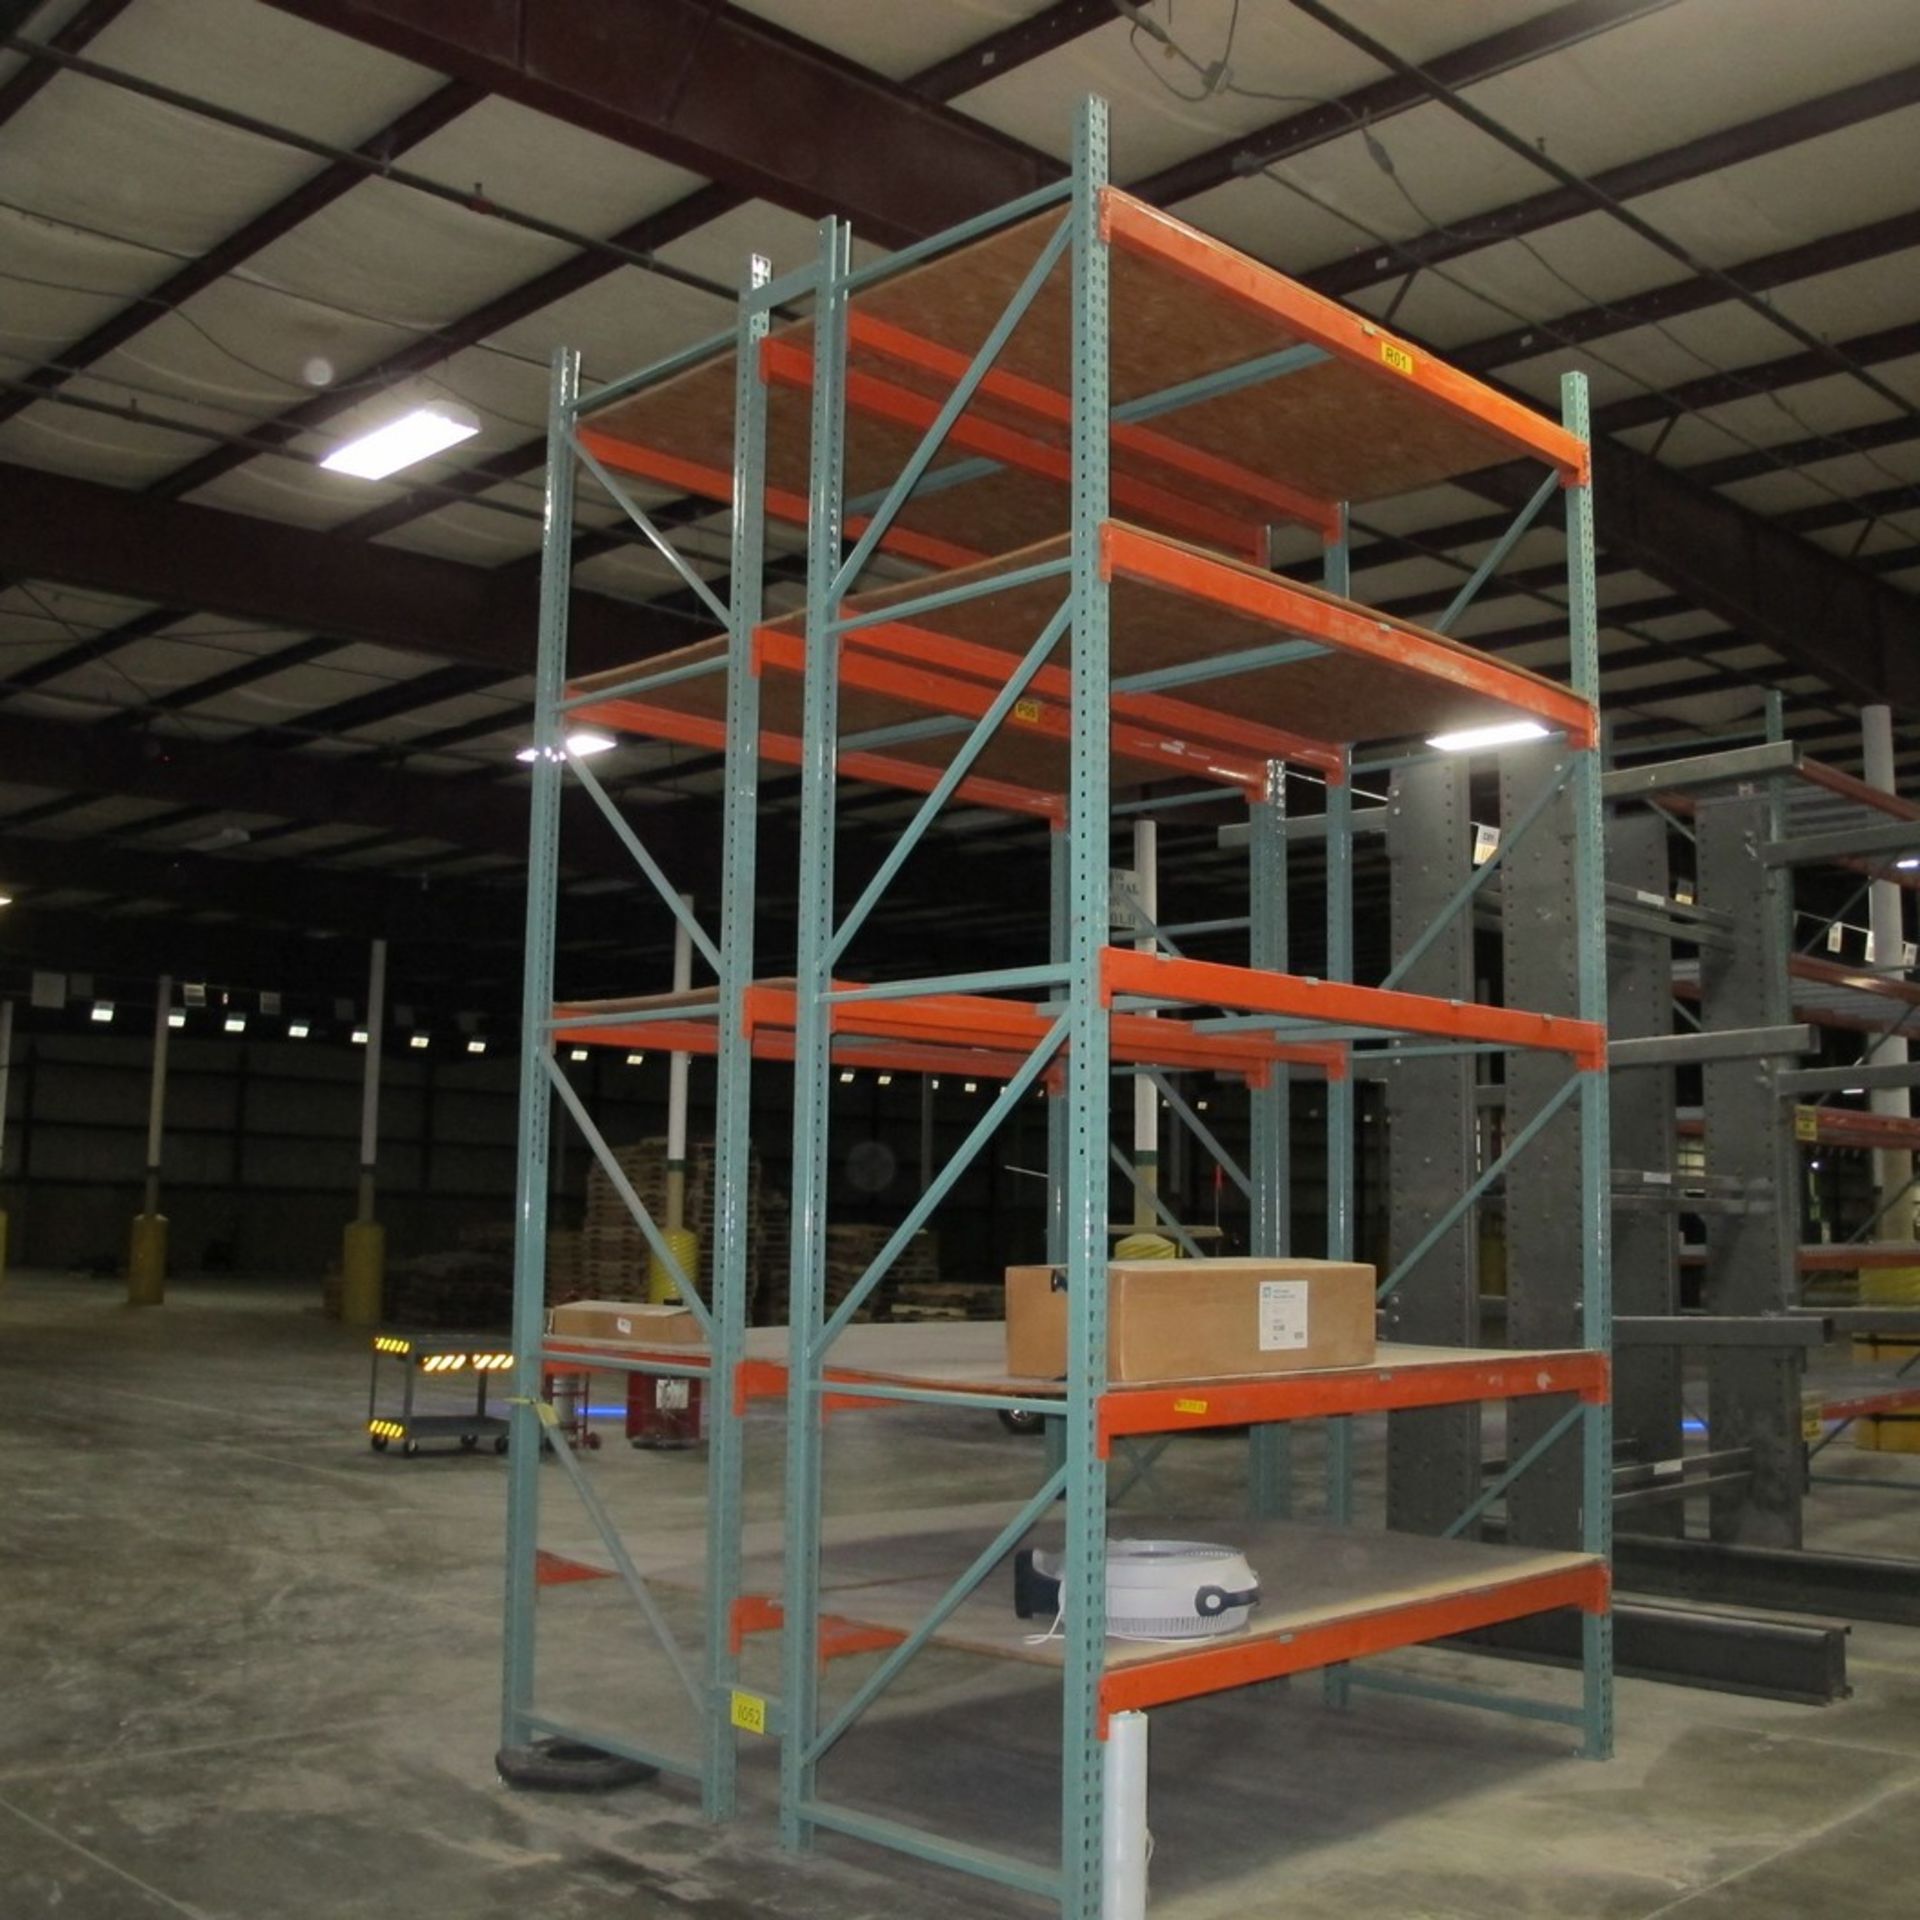 LOT OF (2) SECTIONS PALLET RACKING W/ PLYWOOD DECK INSERTS, (6) LEVELS, APPROX. 42"D X 8'W X 14'H